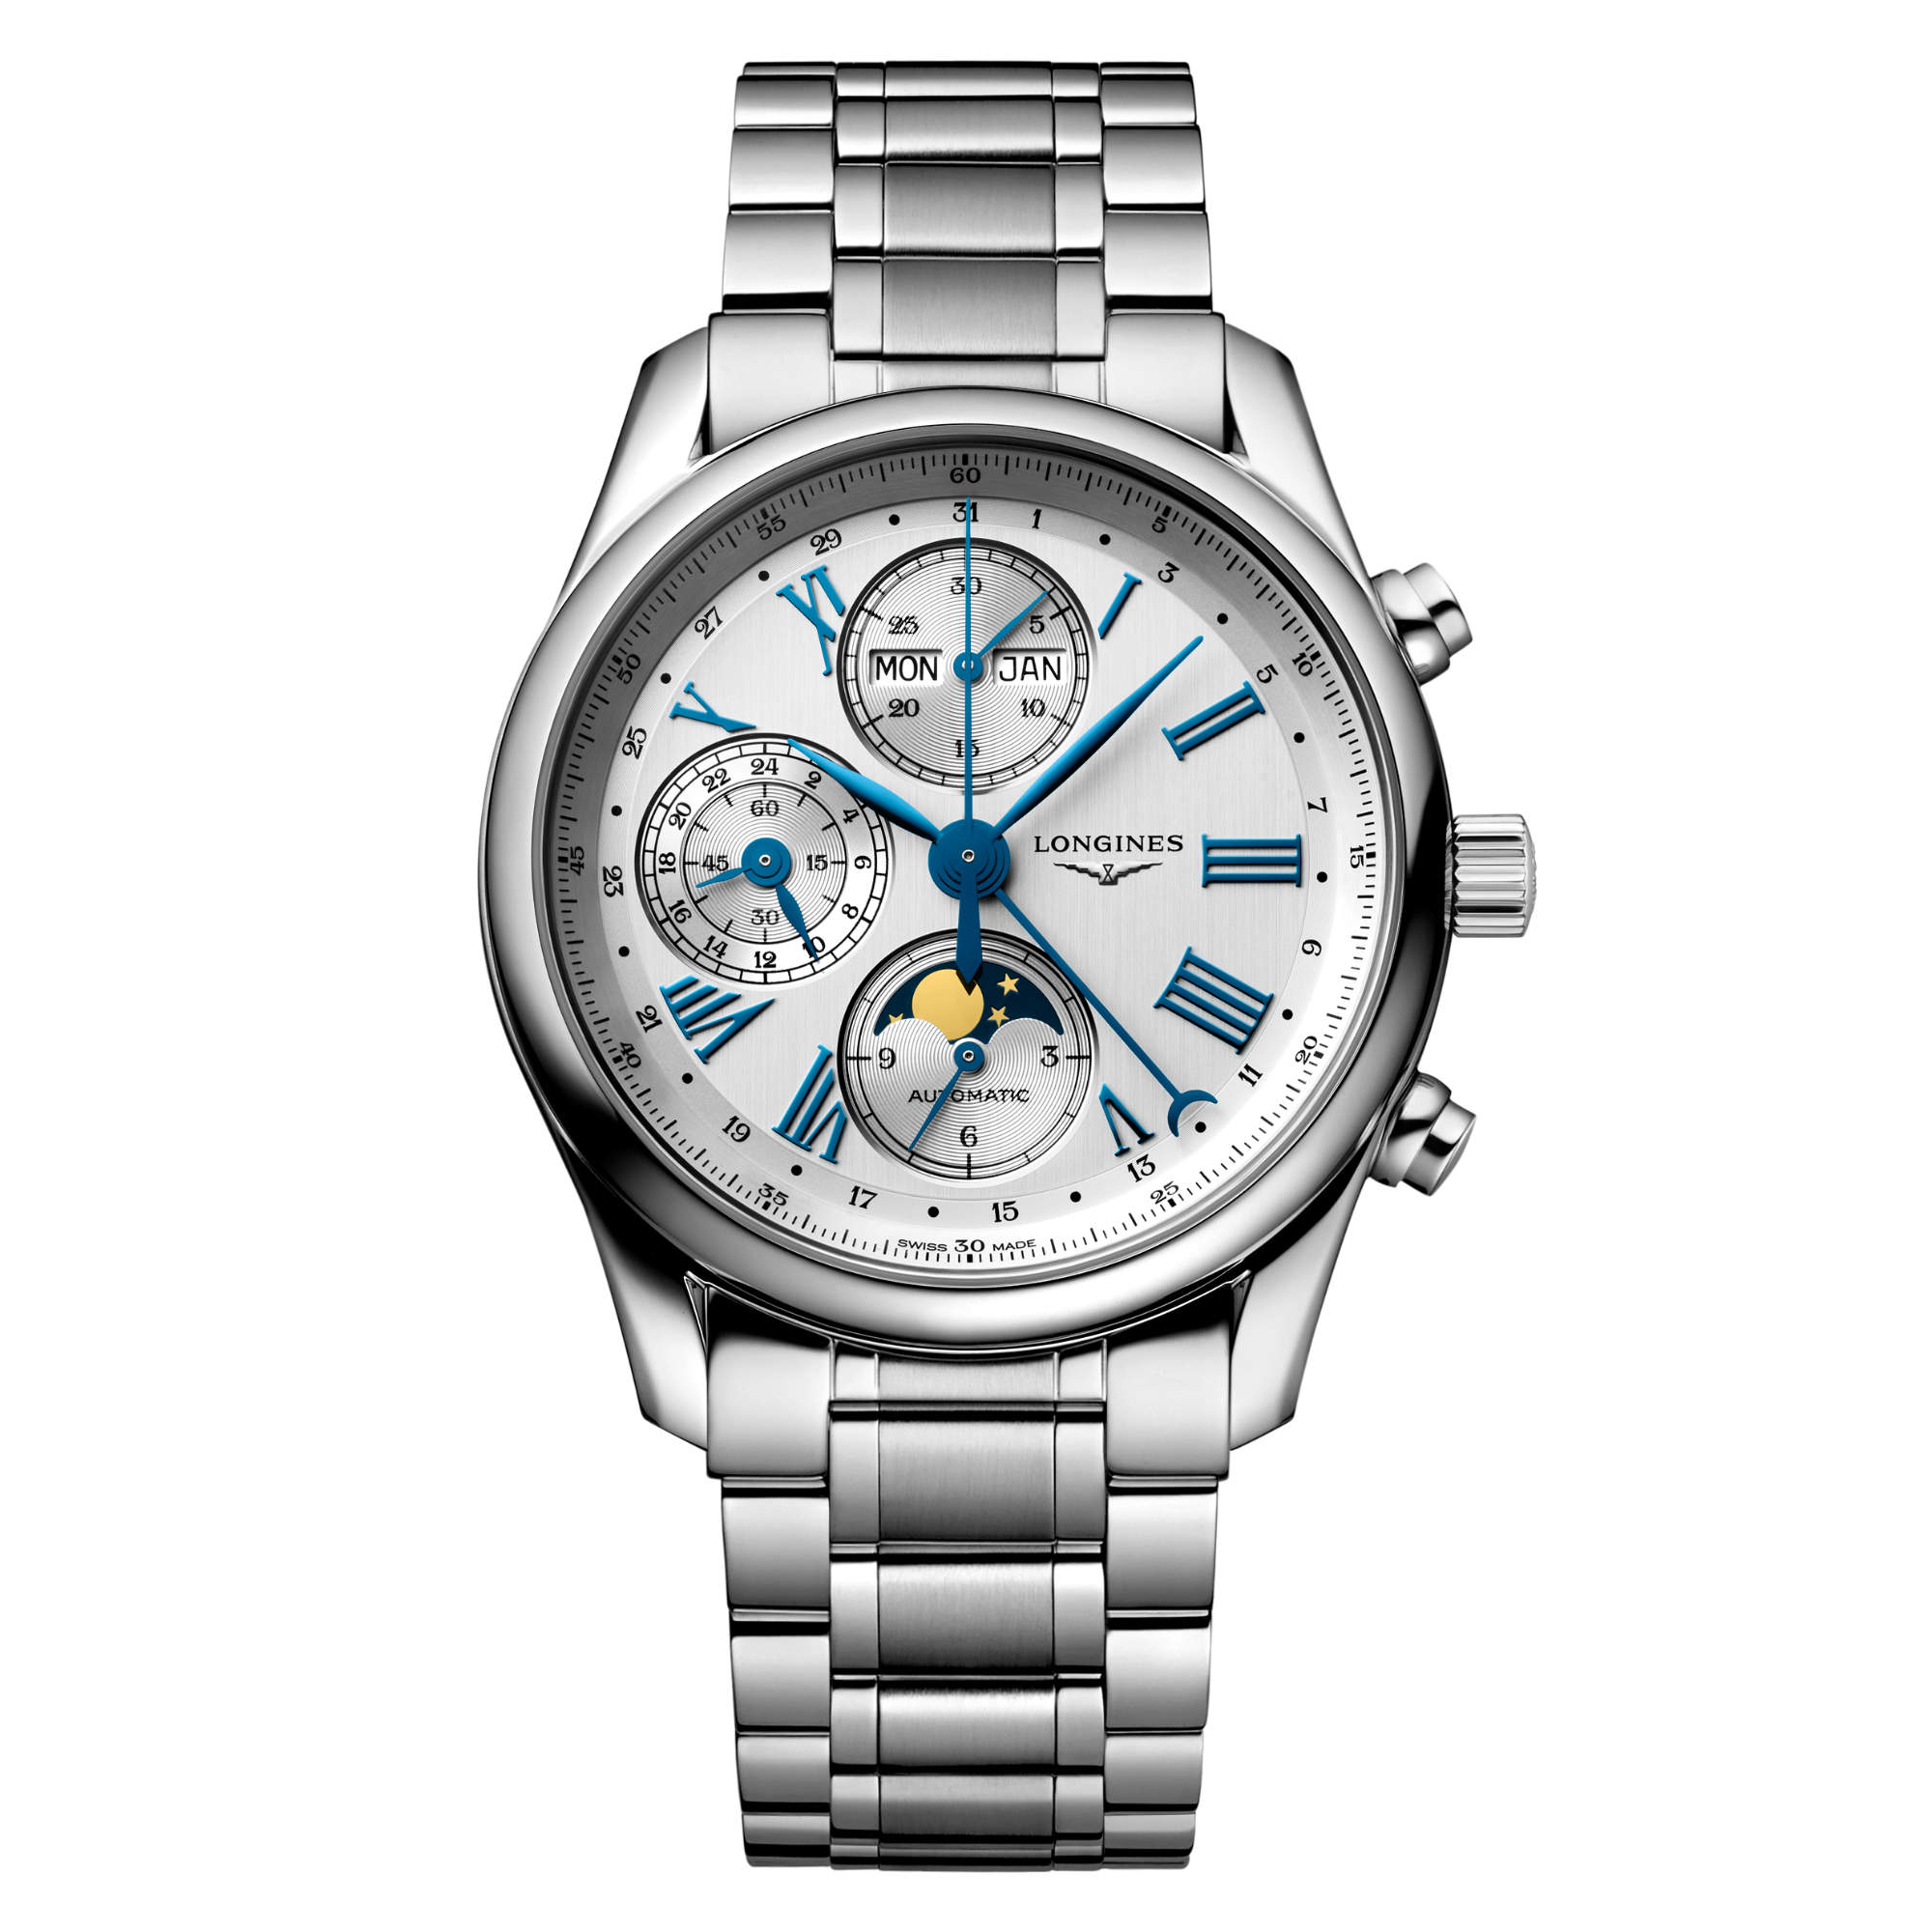 Longines The Longines Master Collection (Ref: L2.673.4.71.6)